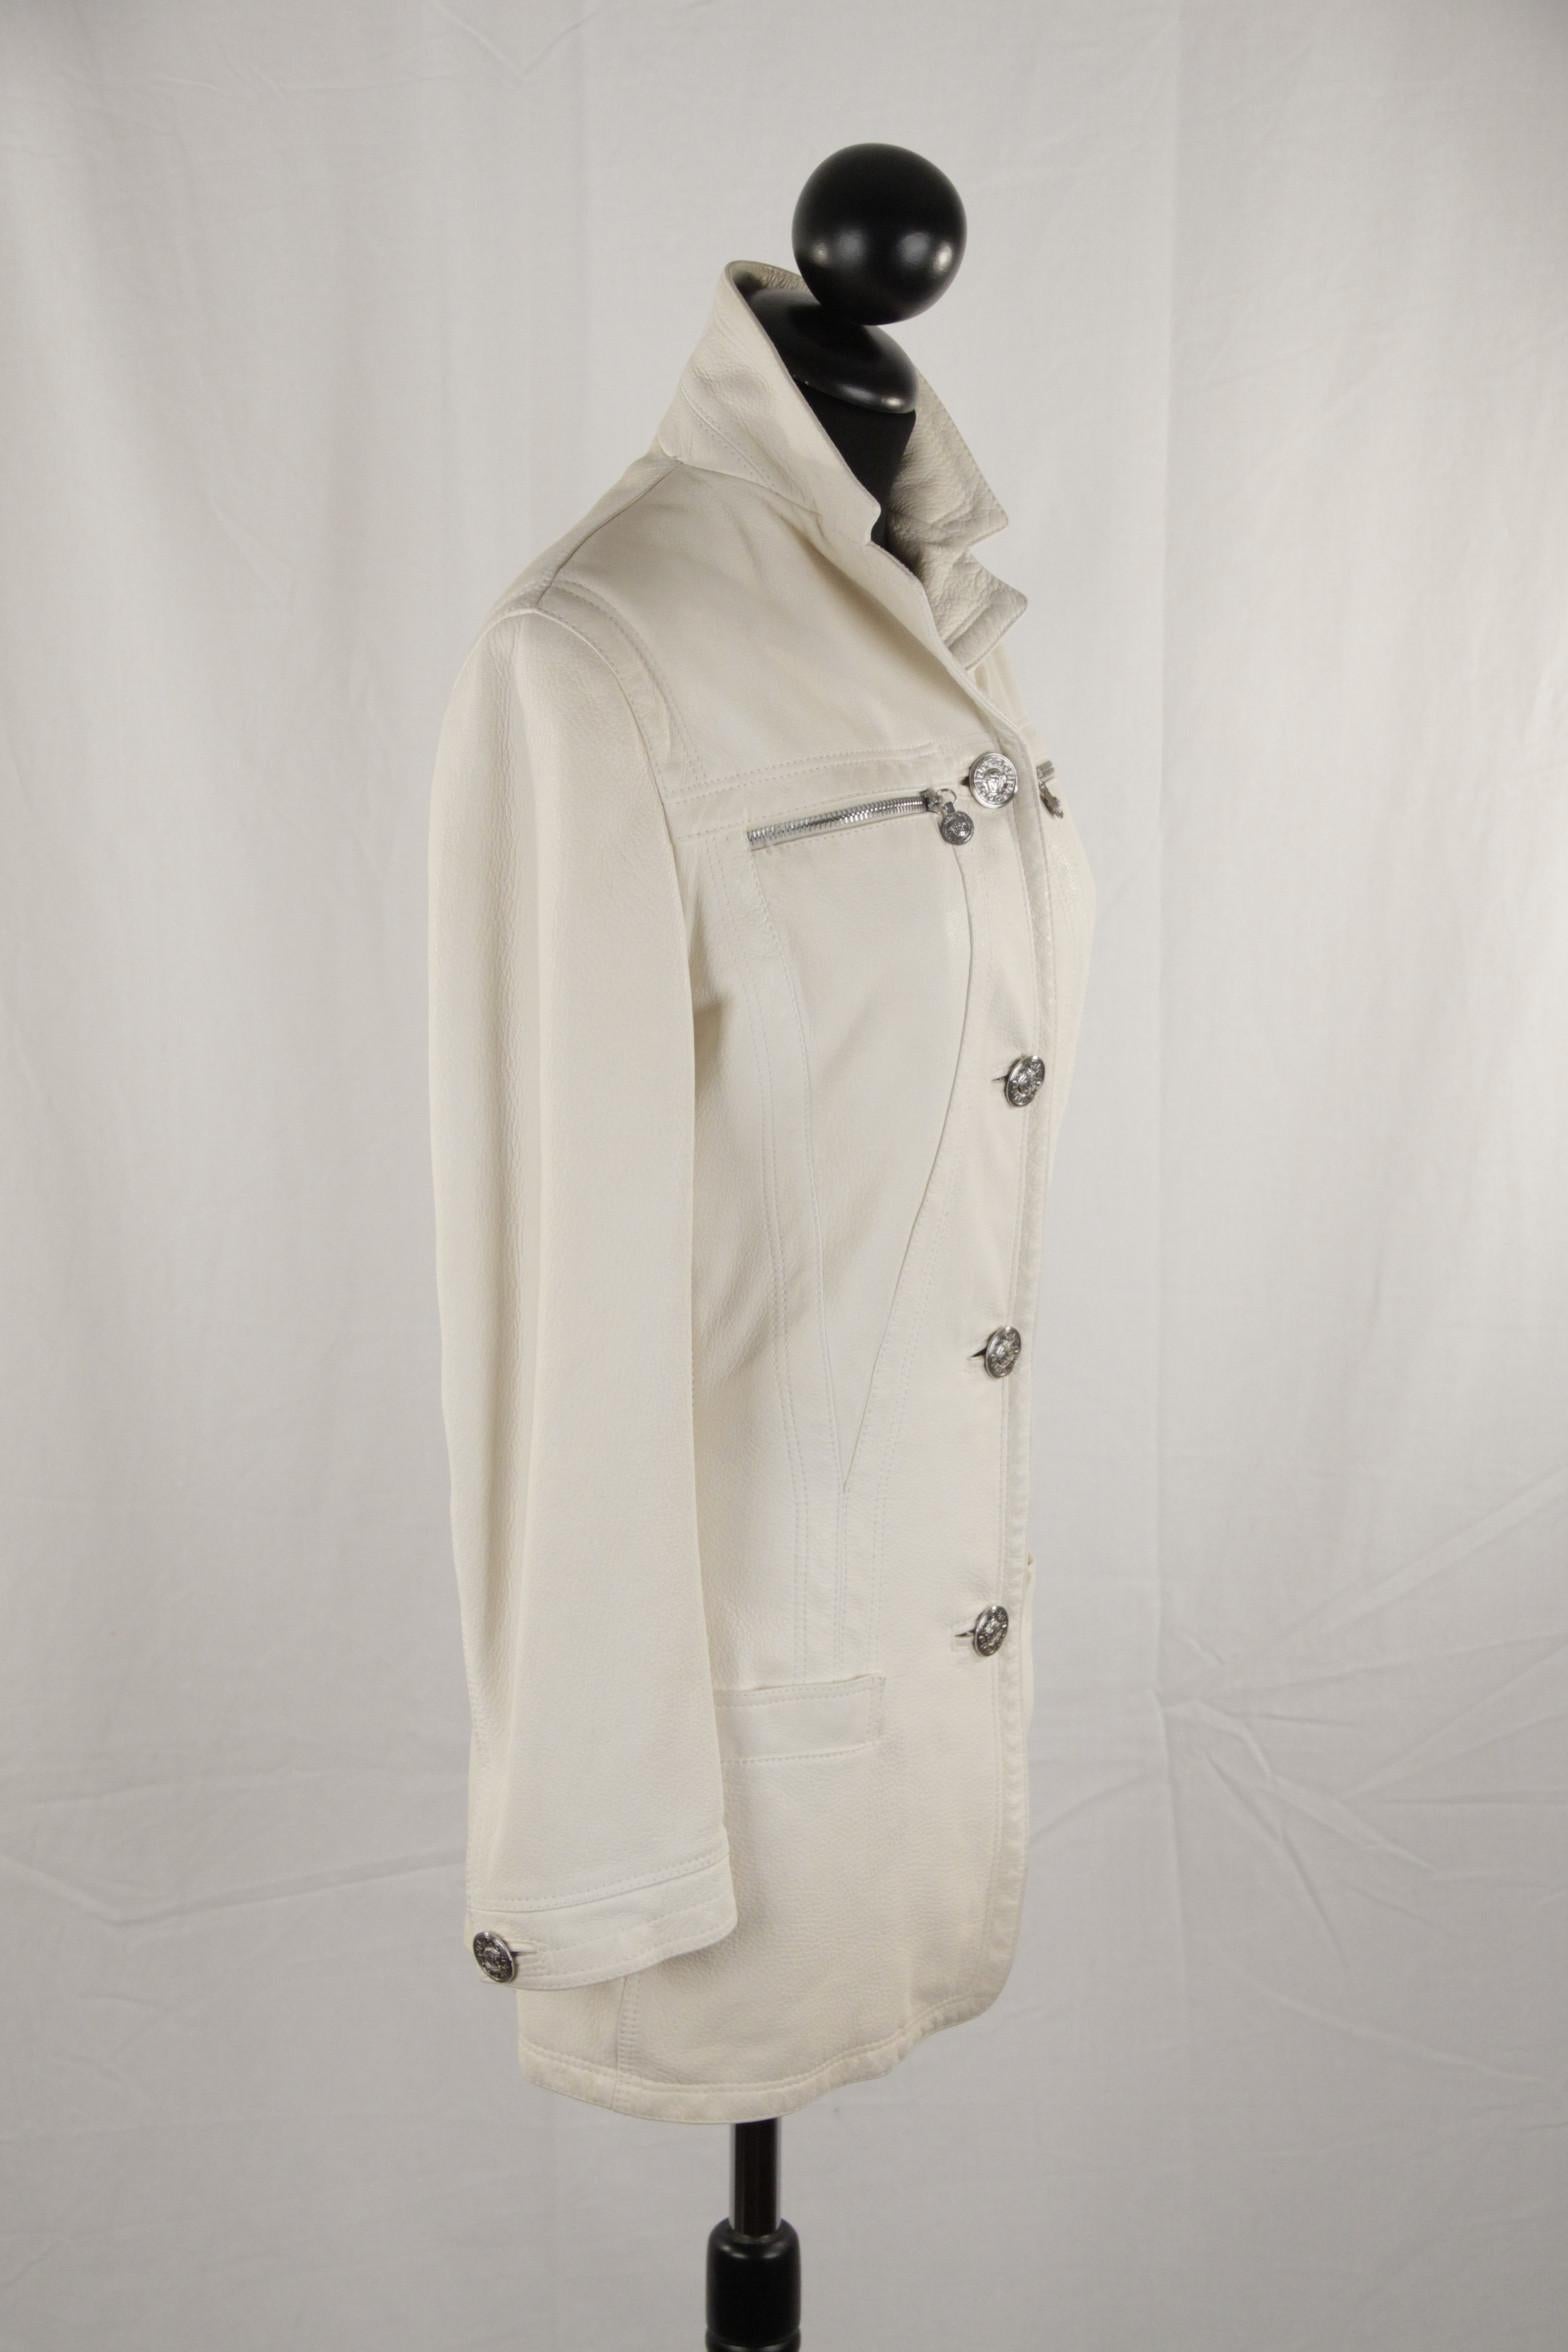 Women's Gianni Versace Vintage White Leather Jacket with Medusa Details